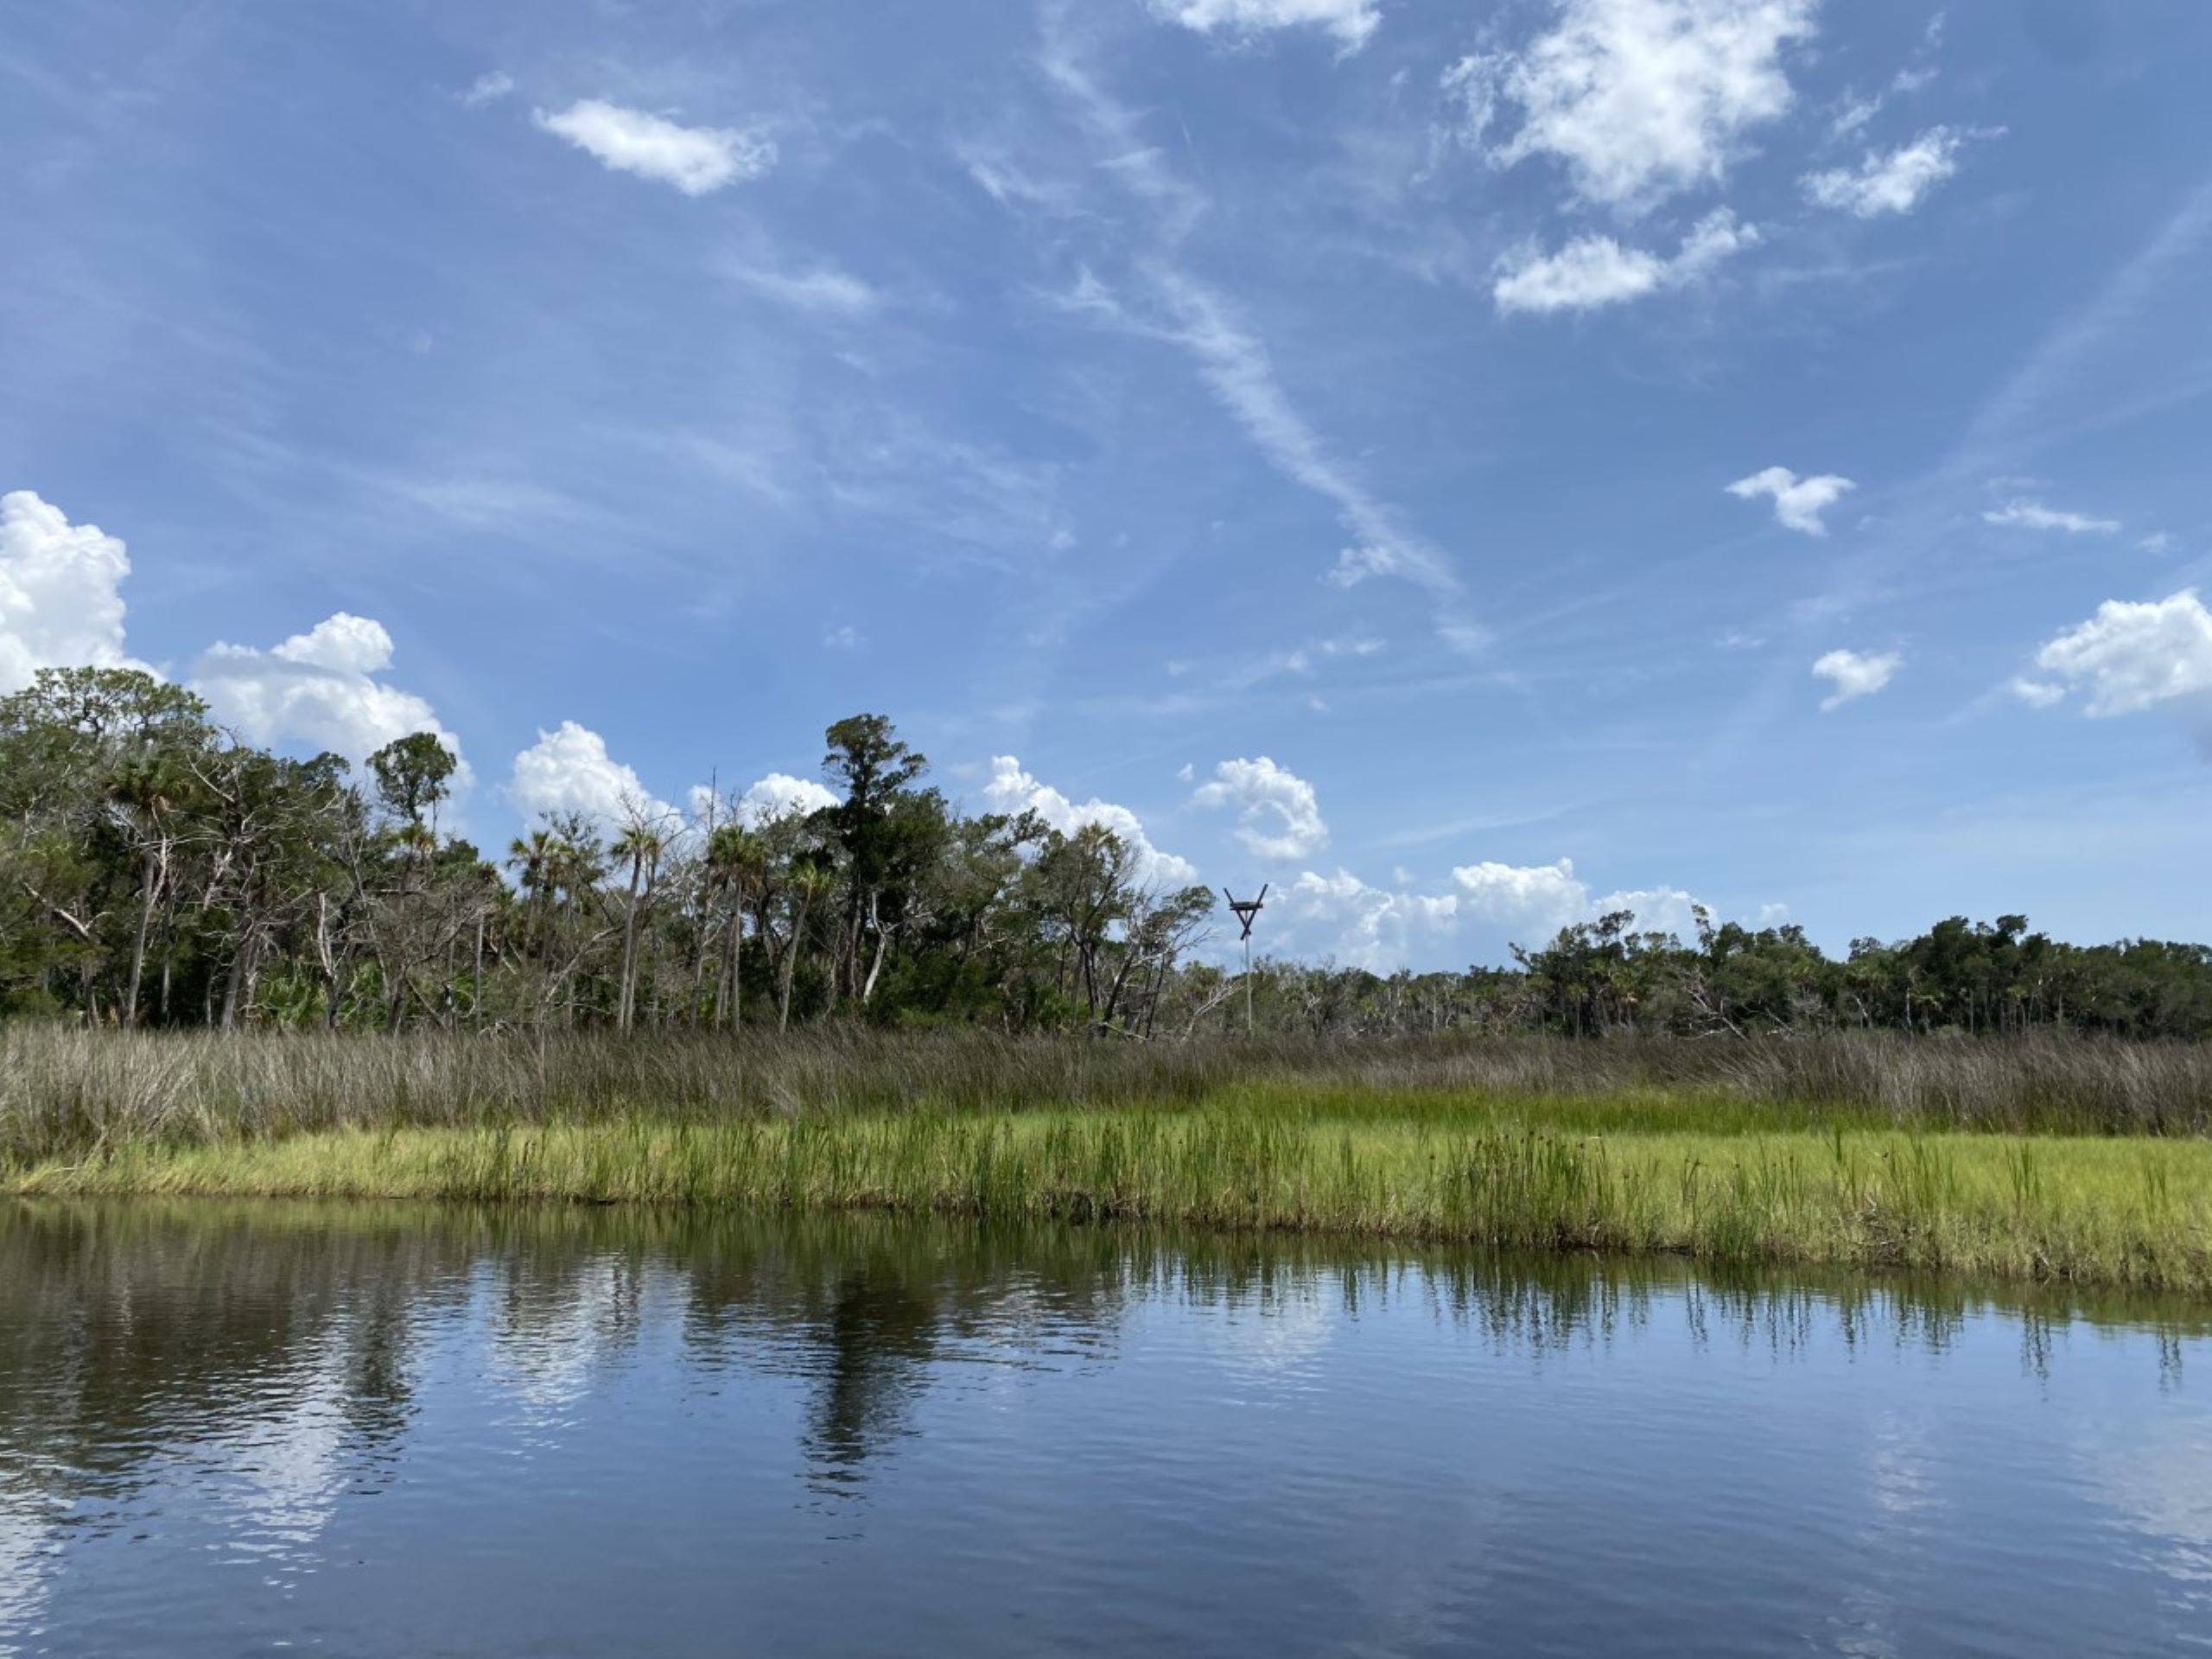 Landscape scenery with blue sky and vegetation along reflective, calm water